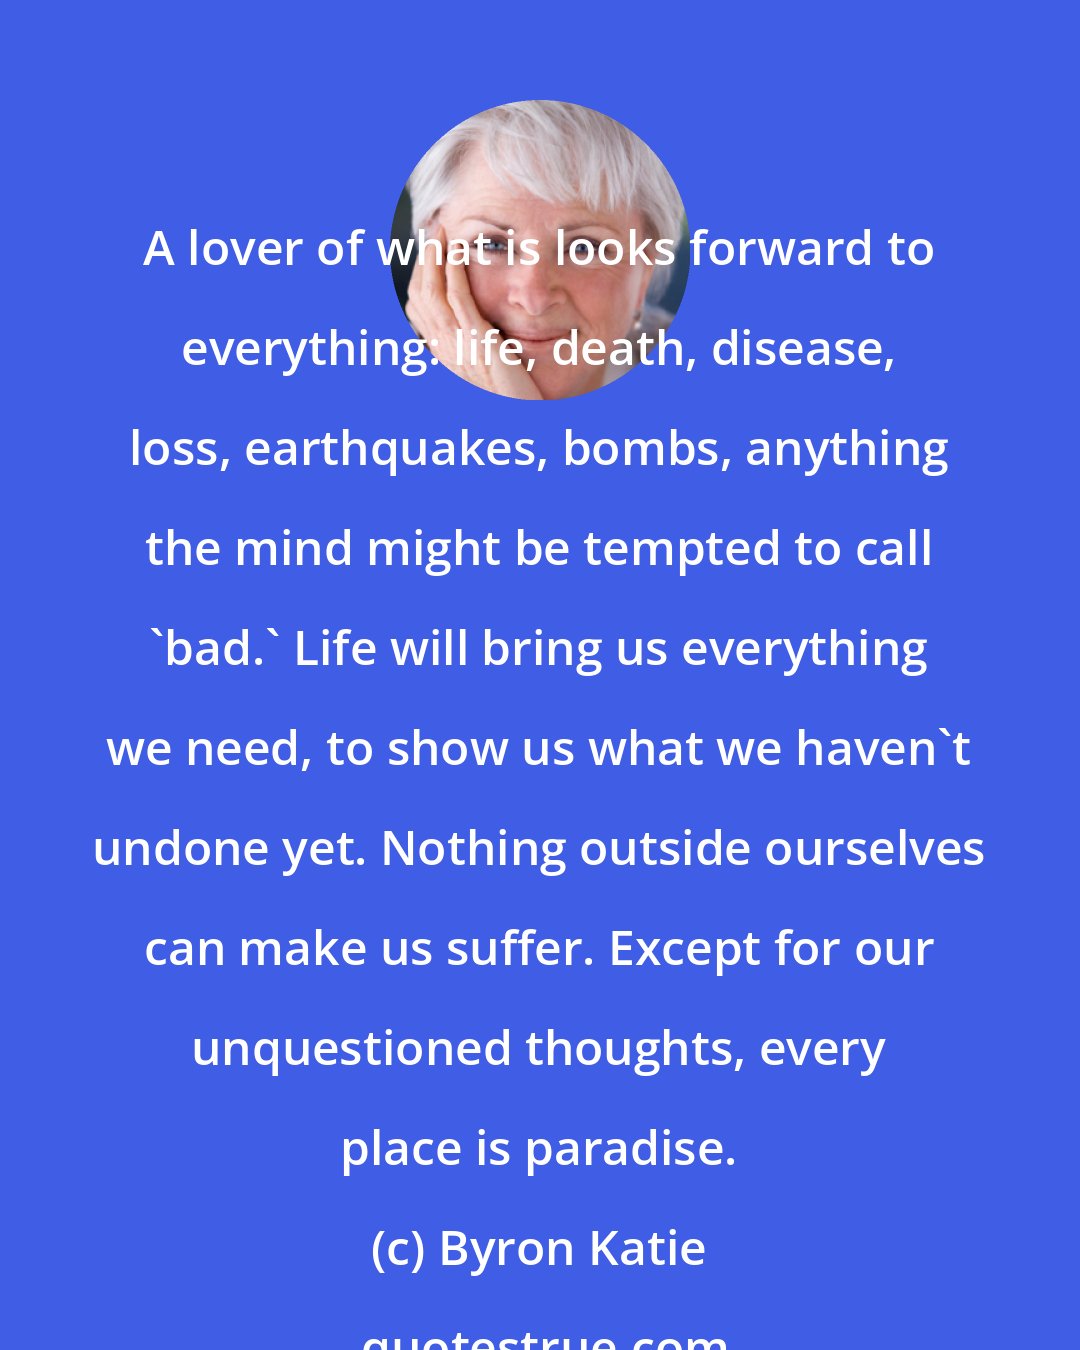 Byron Katie: A lover of what is looks forward to everything: life, death, disease, loss, earthquakes, bombs, anything the mind might be tempted to call 'bad.' Life will bring us everything we need, to show us what we haven't undone yet. Nothing outside ourselves can make us suffer. Except for our unquestioned thoughts, every place is paradise.